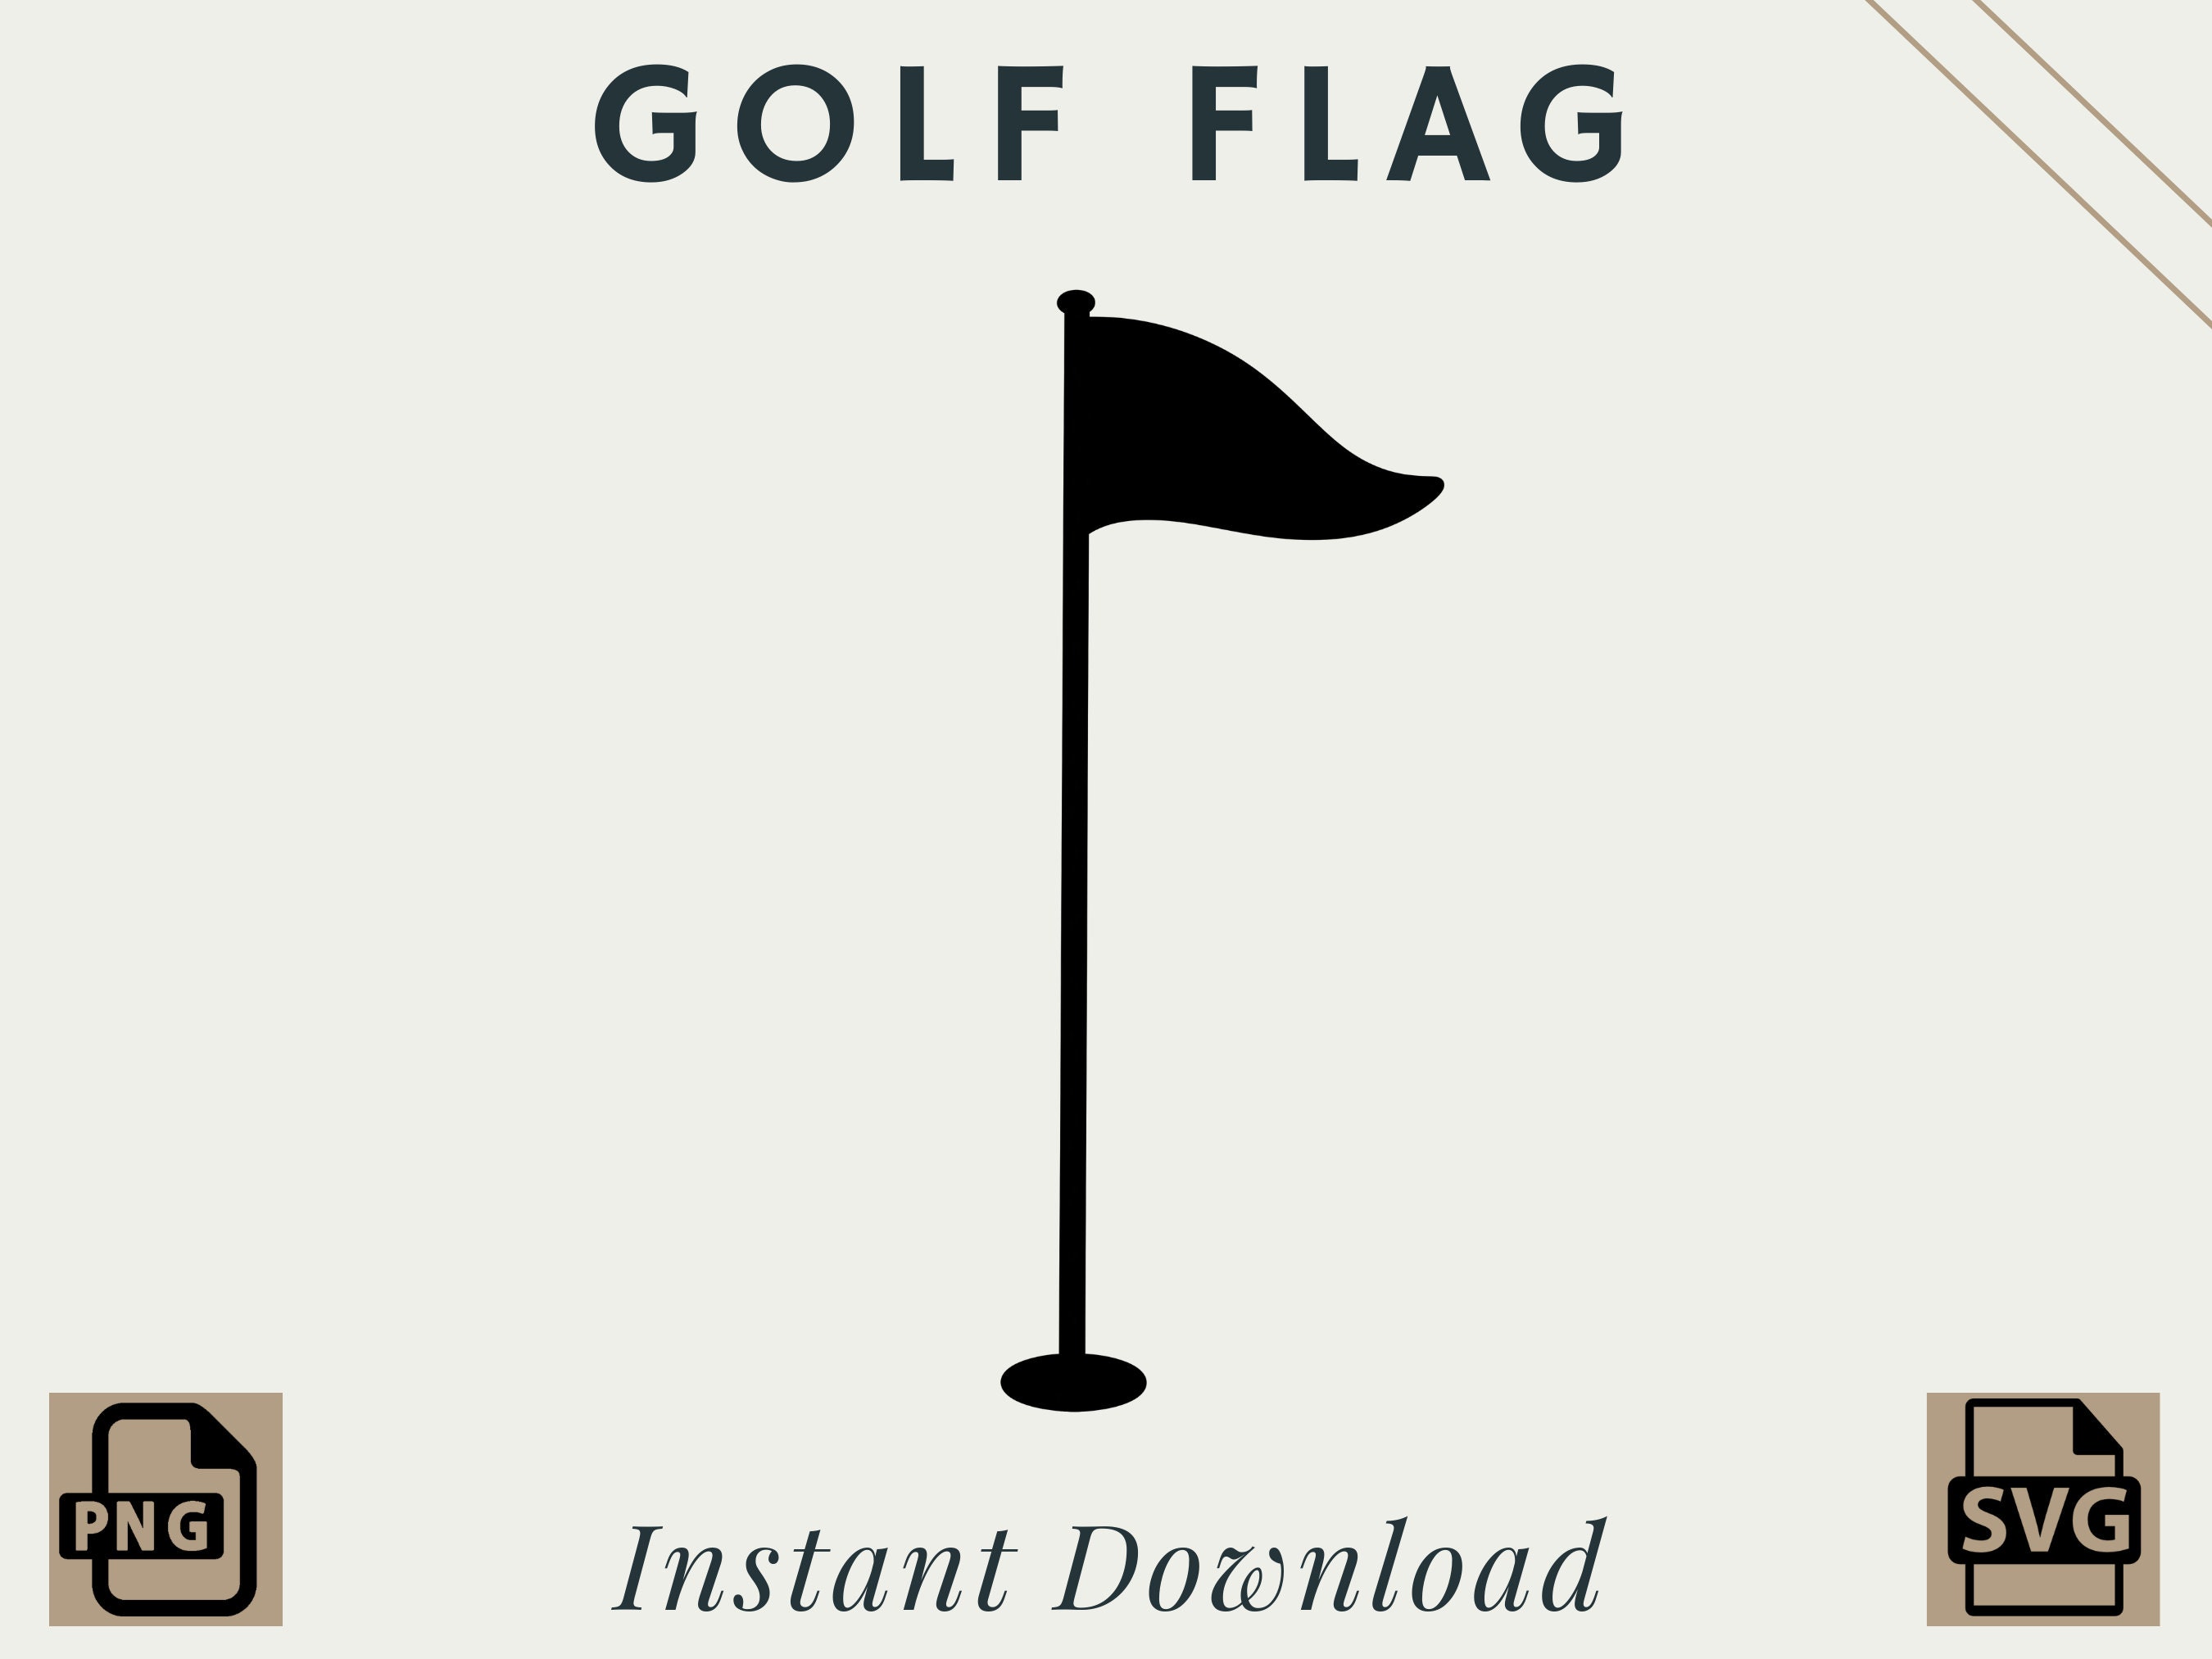 /images/golf-solitaire-200.png